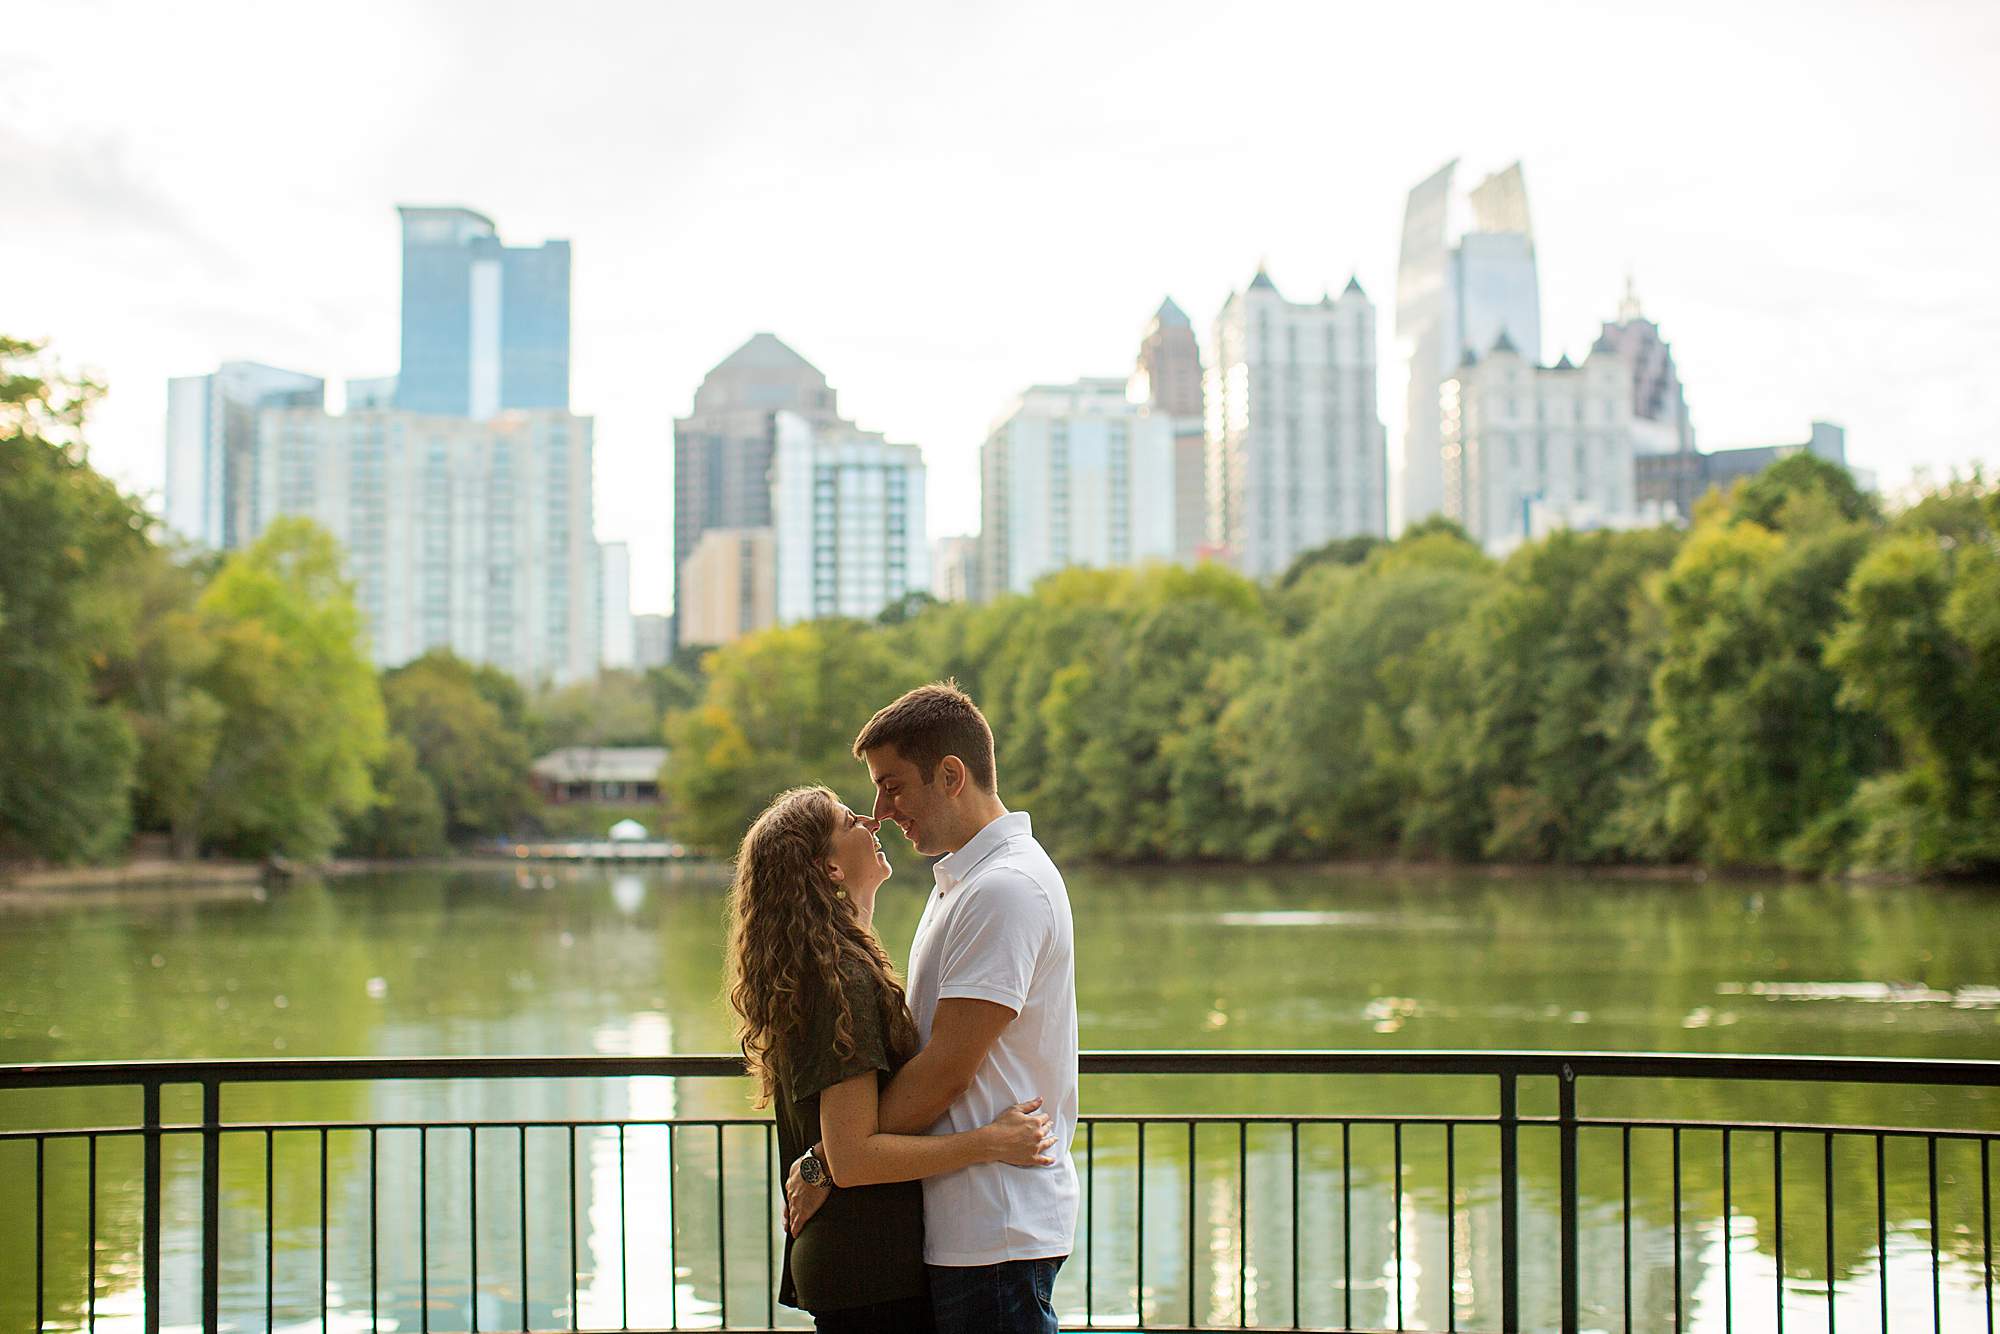 Do you ever run out of date ideas with your babe? Here are 10 ideas for fun dates in Atlanta, ranging from free to fancy!